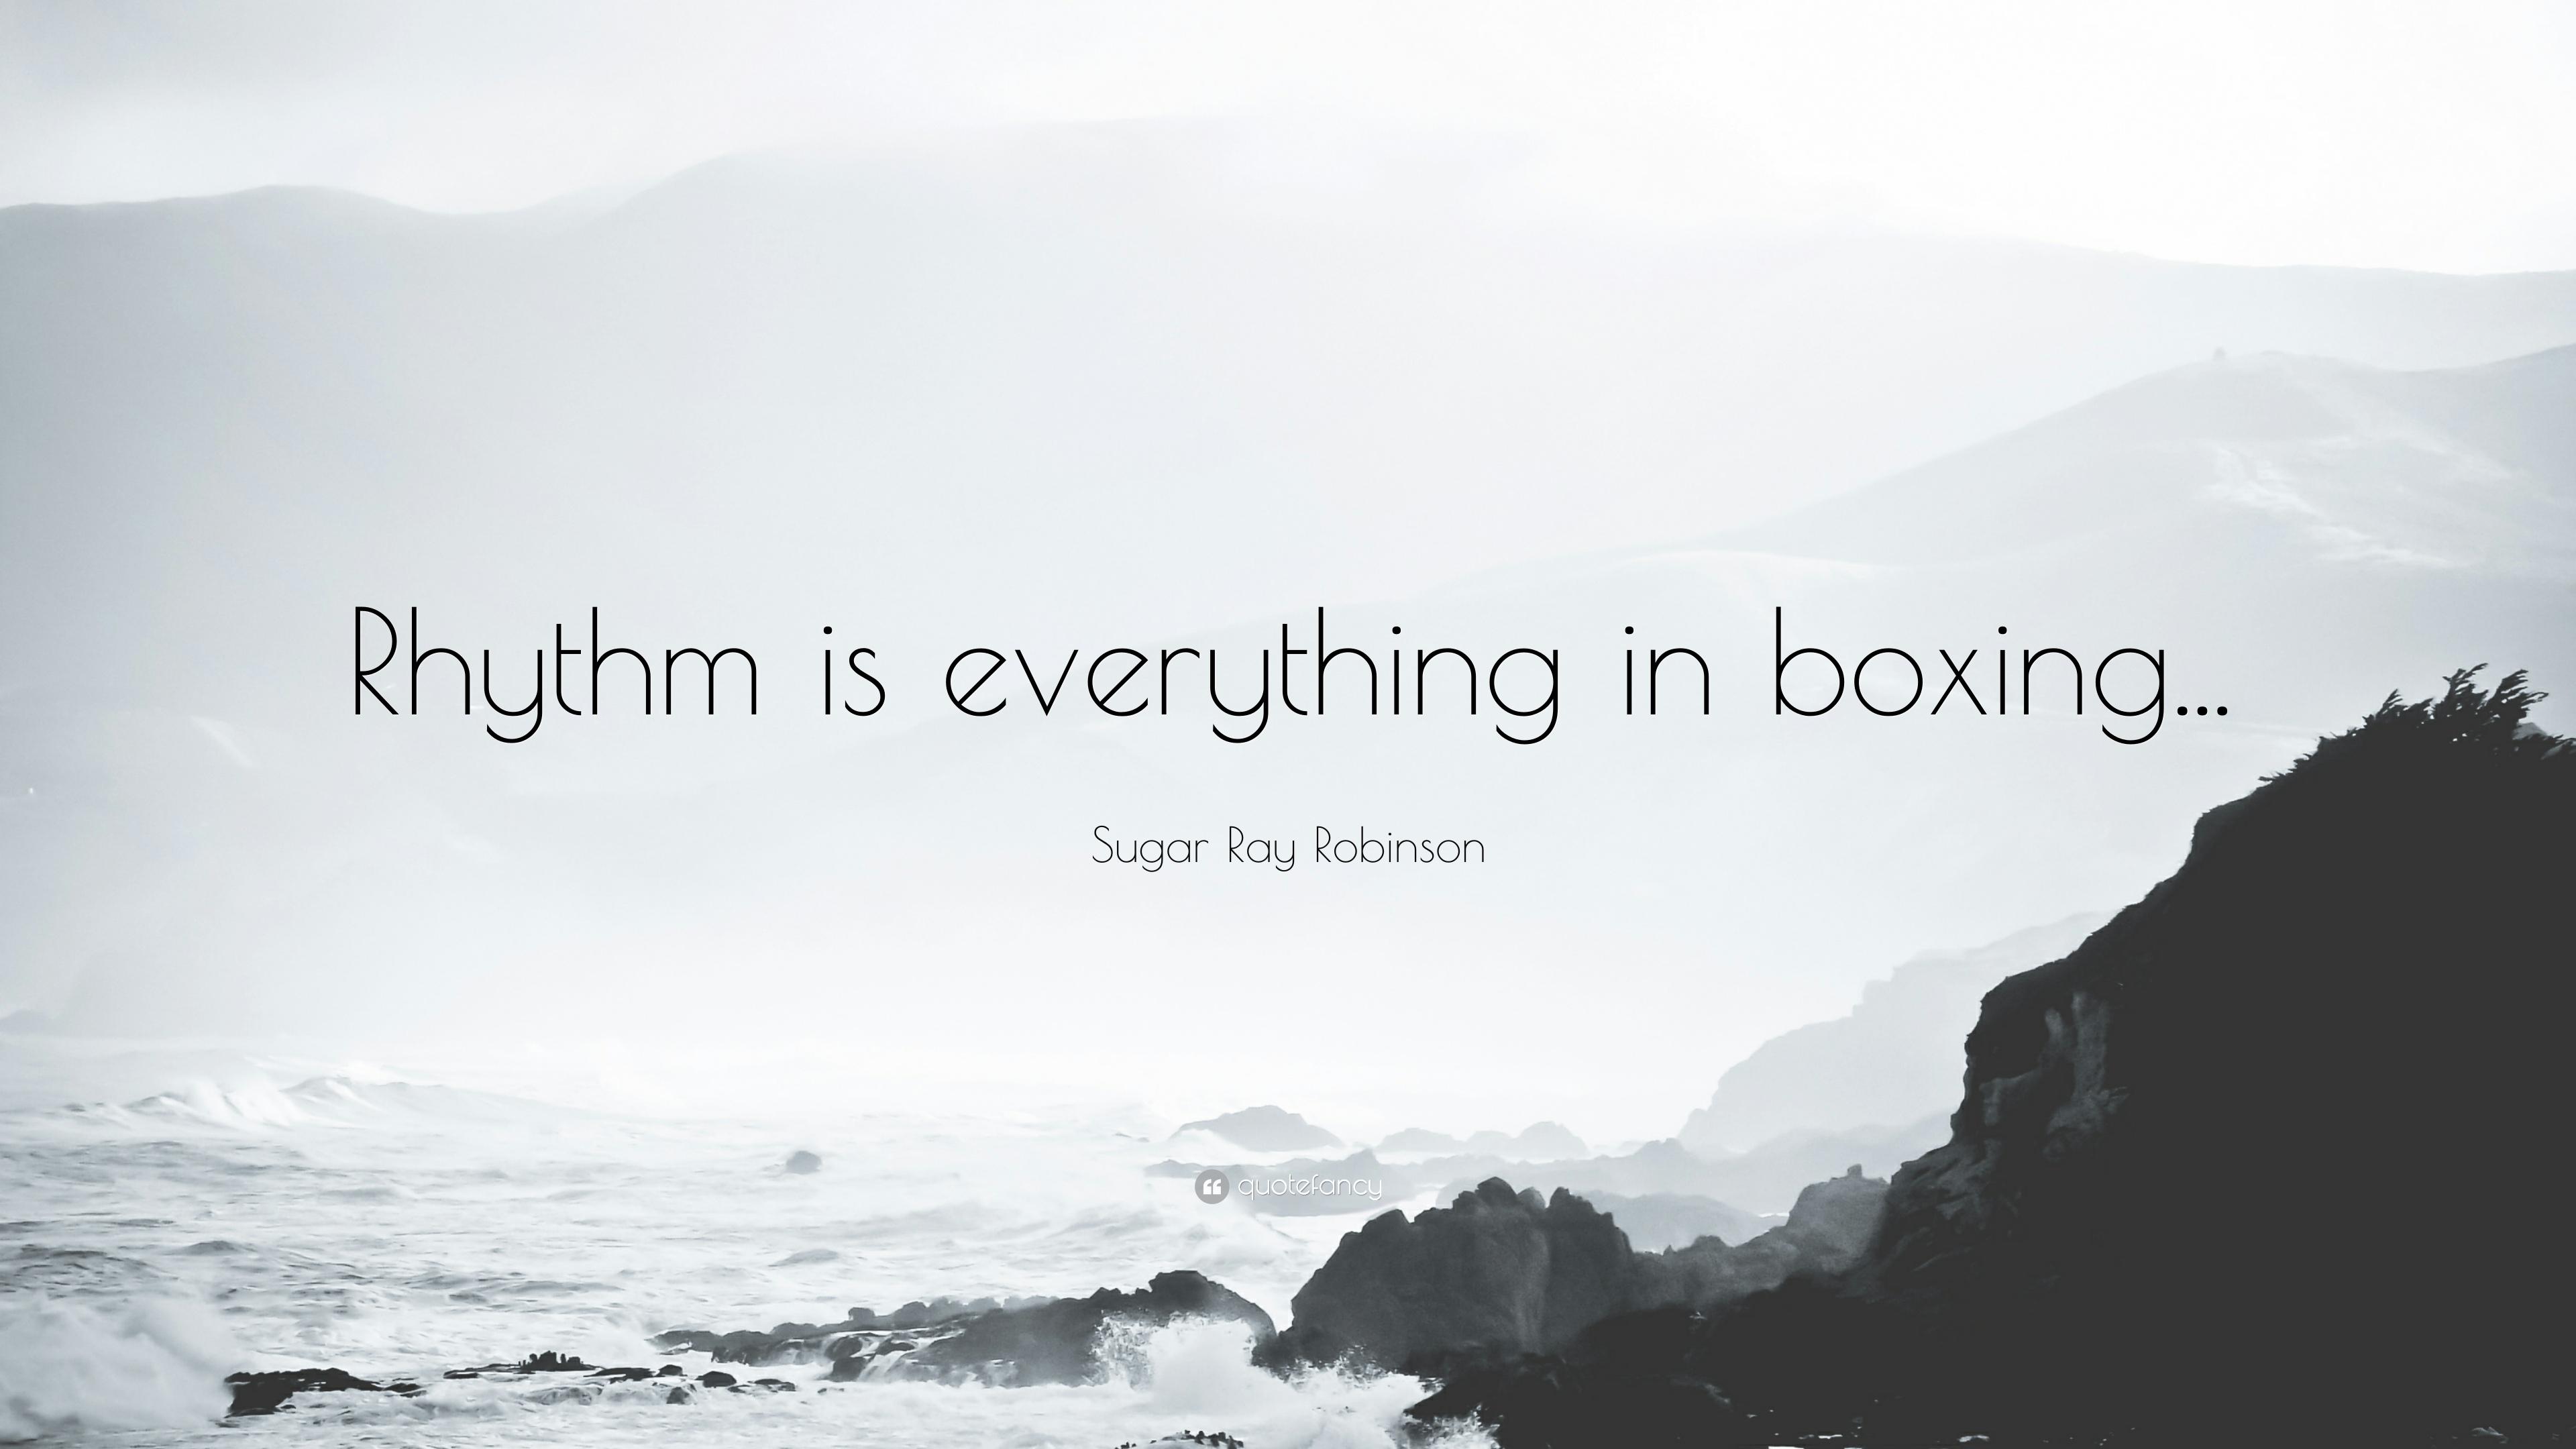 Sugar Ray Robinson Quote: “Rhythm is everything in boxing.” 7